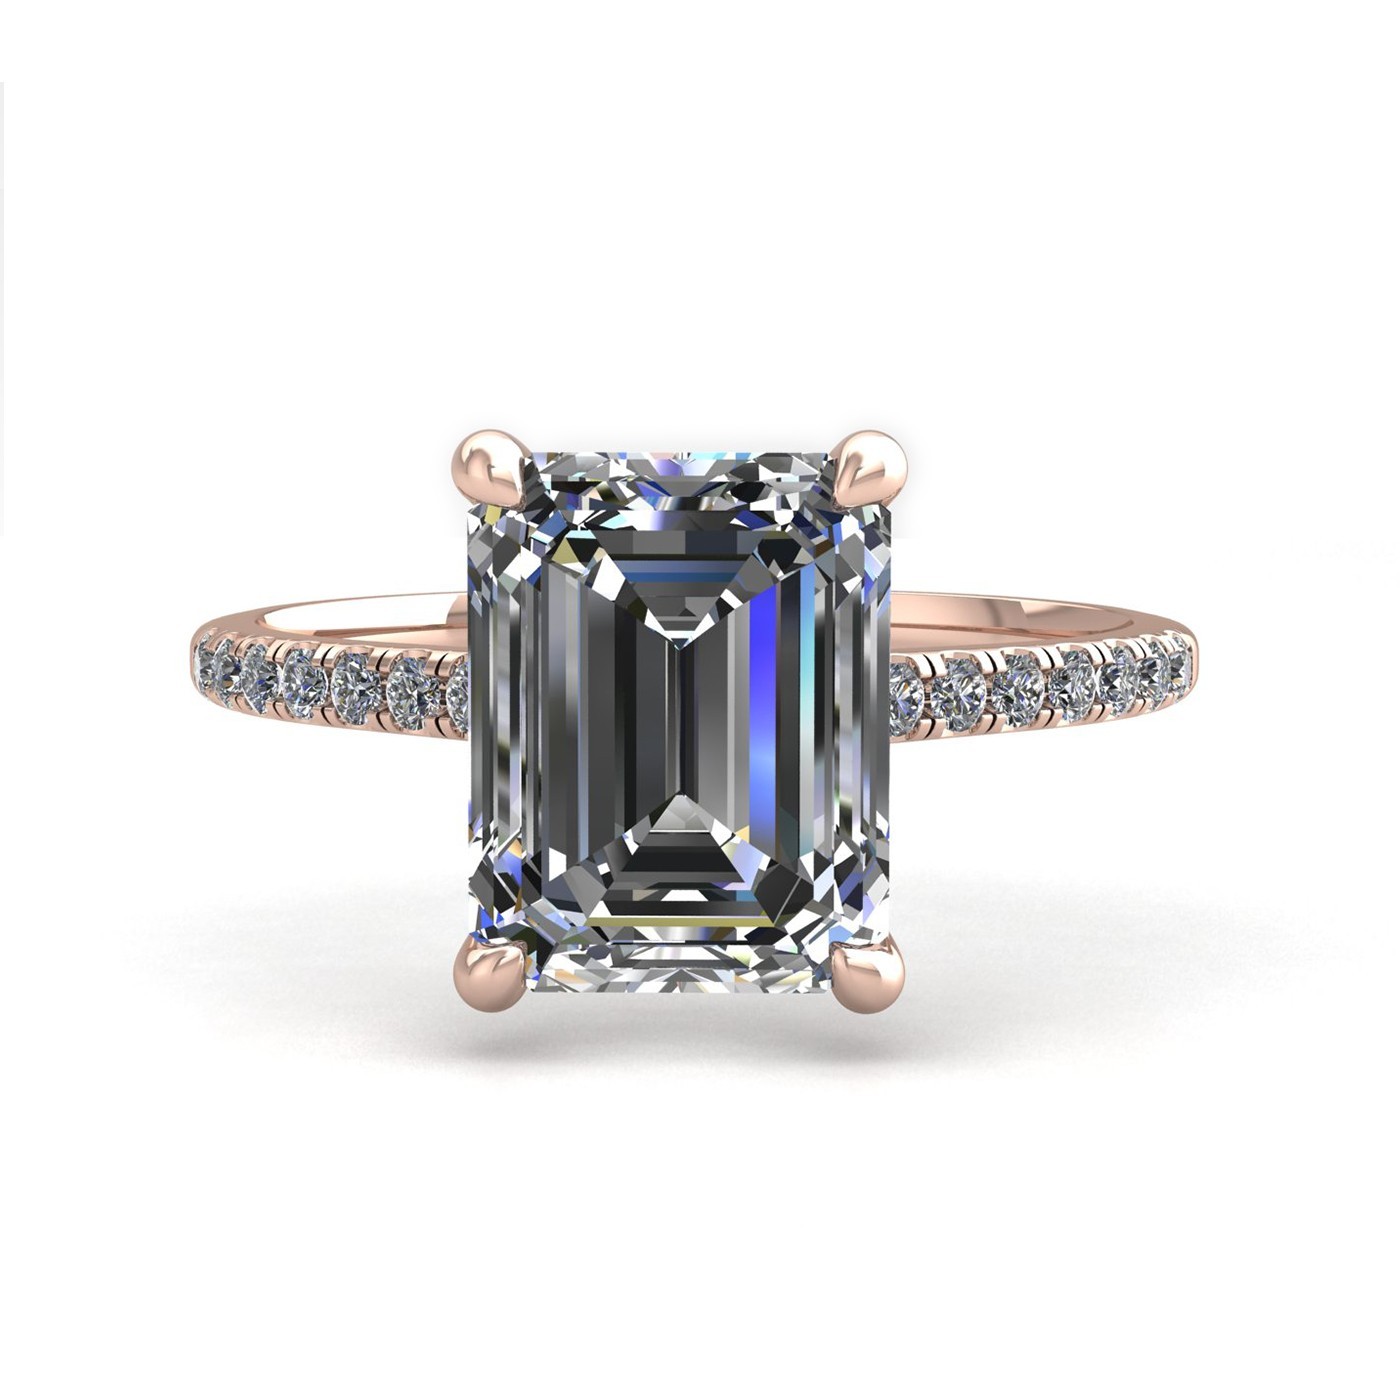 18k rose gold 0,80 ct 4 prongs emerald cut diamond engagement ring with whisper thin pavÉ set band Photos & images